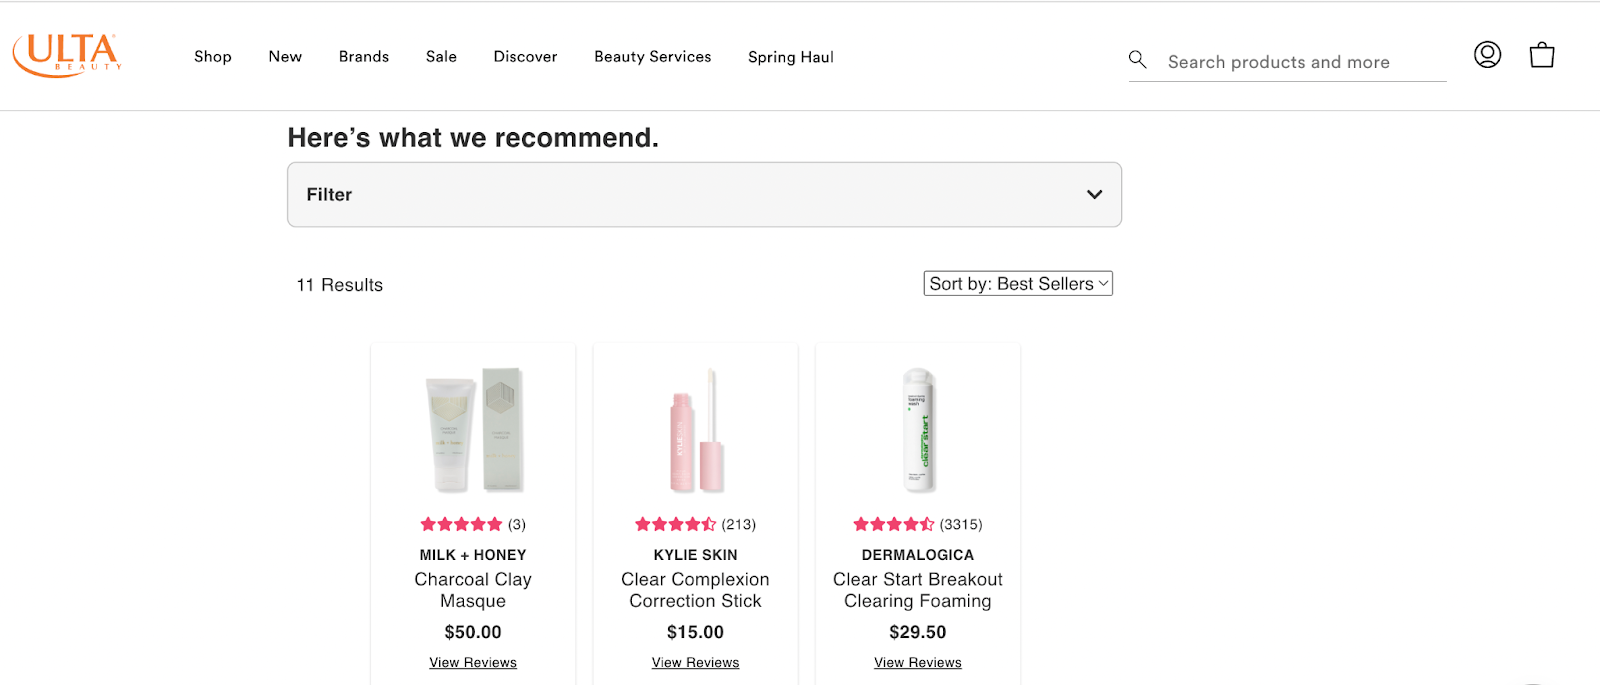 recommendation page of Ulta quiz